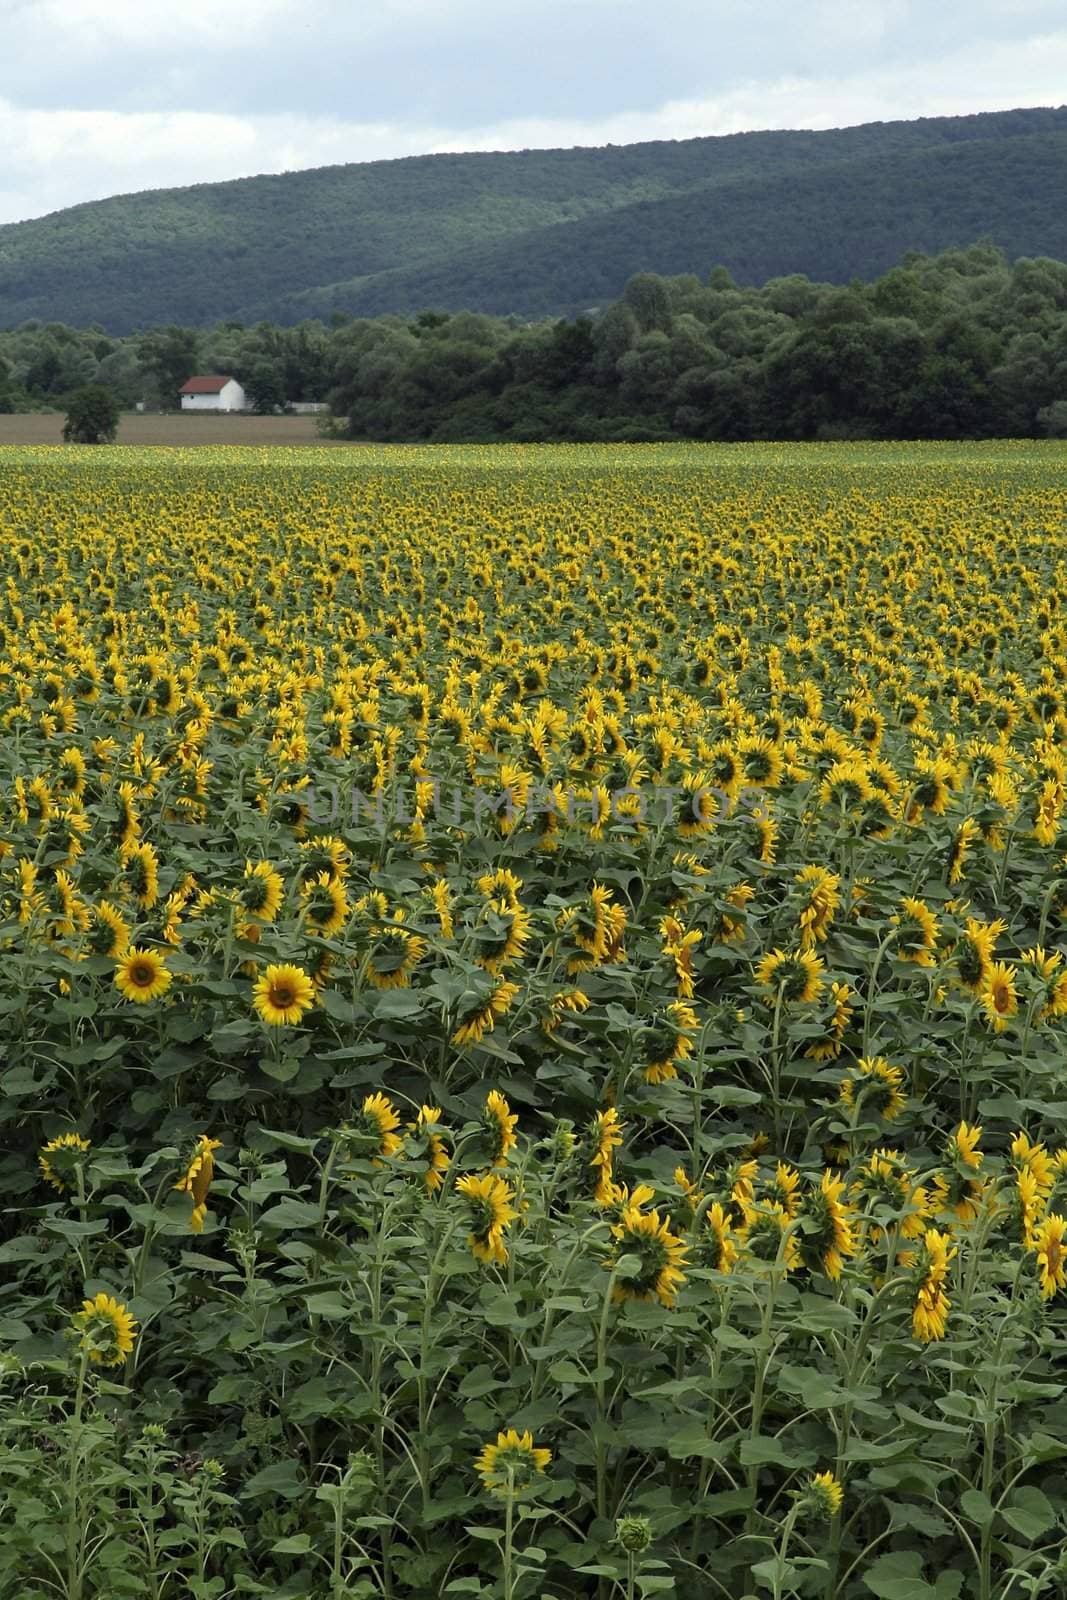 sunflowers field, small white house with brown roof in background, green hills